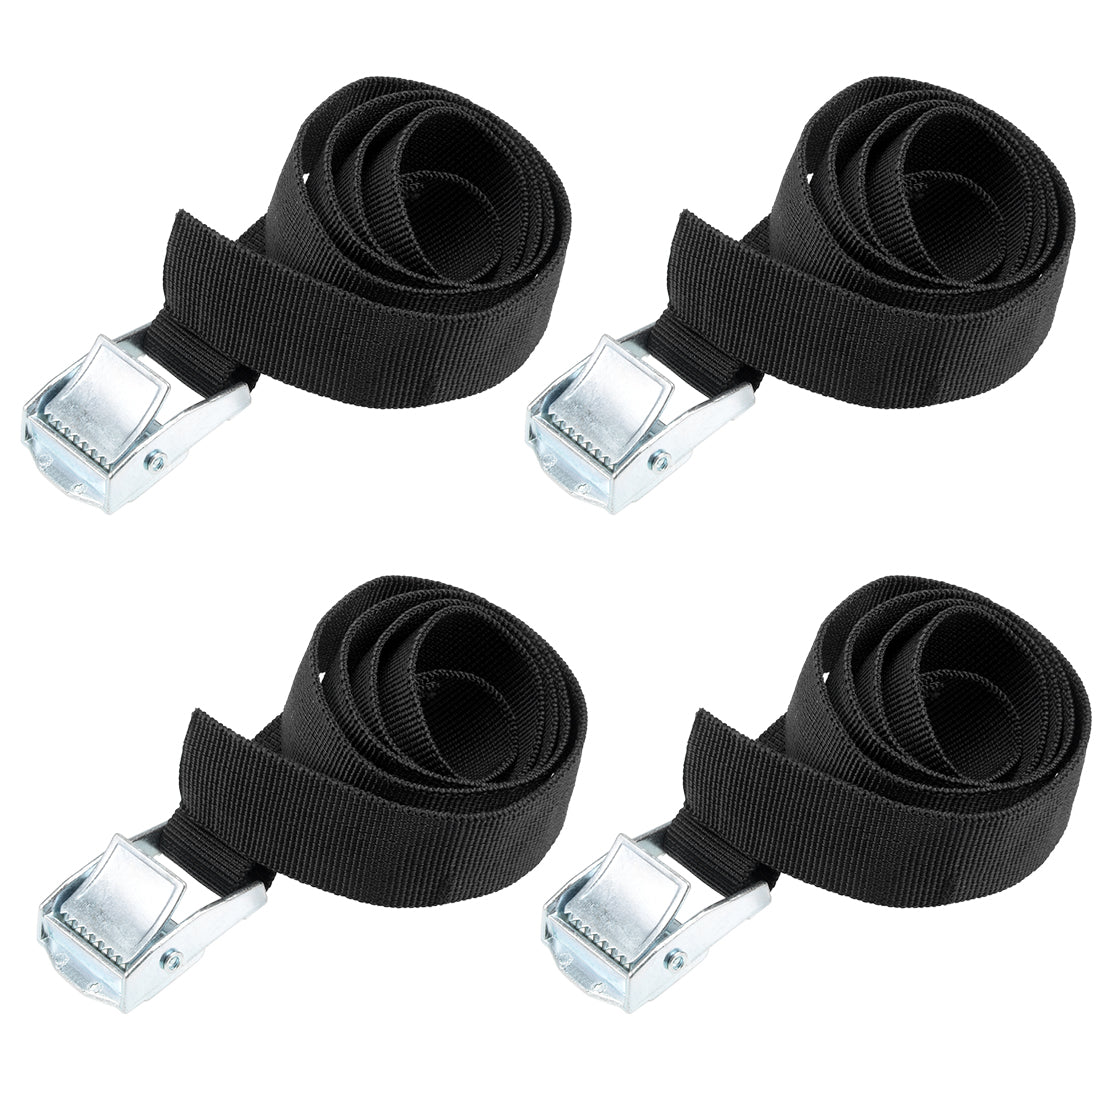 uxcell Uxcell 0.8M x 25mm Lashing Strap Cargo Tie Down StrapsBuckle Up to 80Kg, Black, 4Pcs